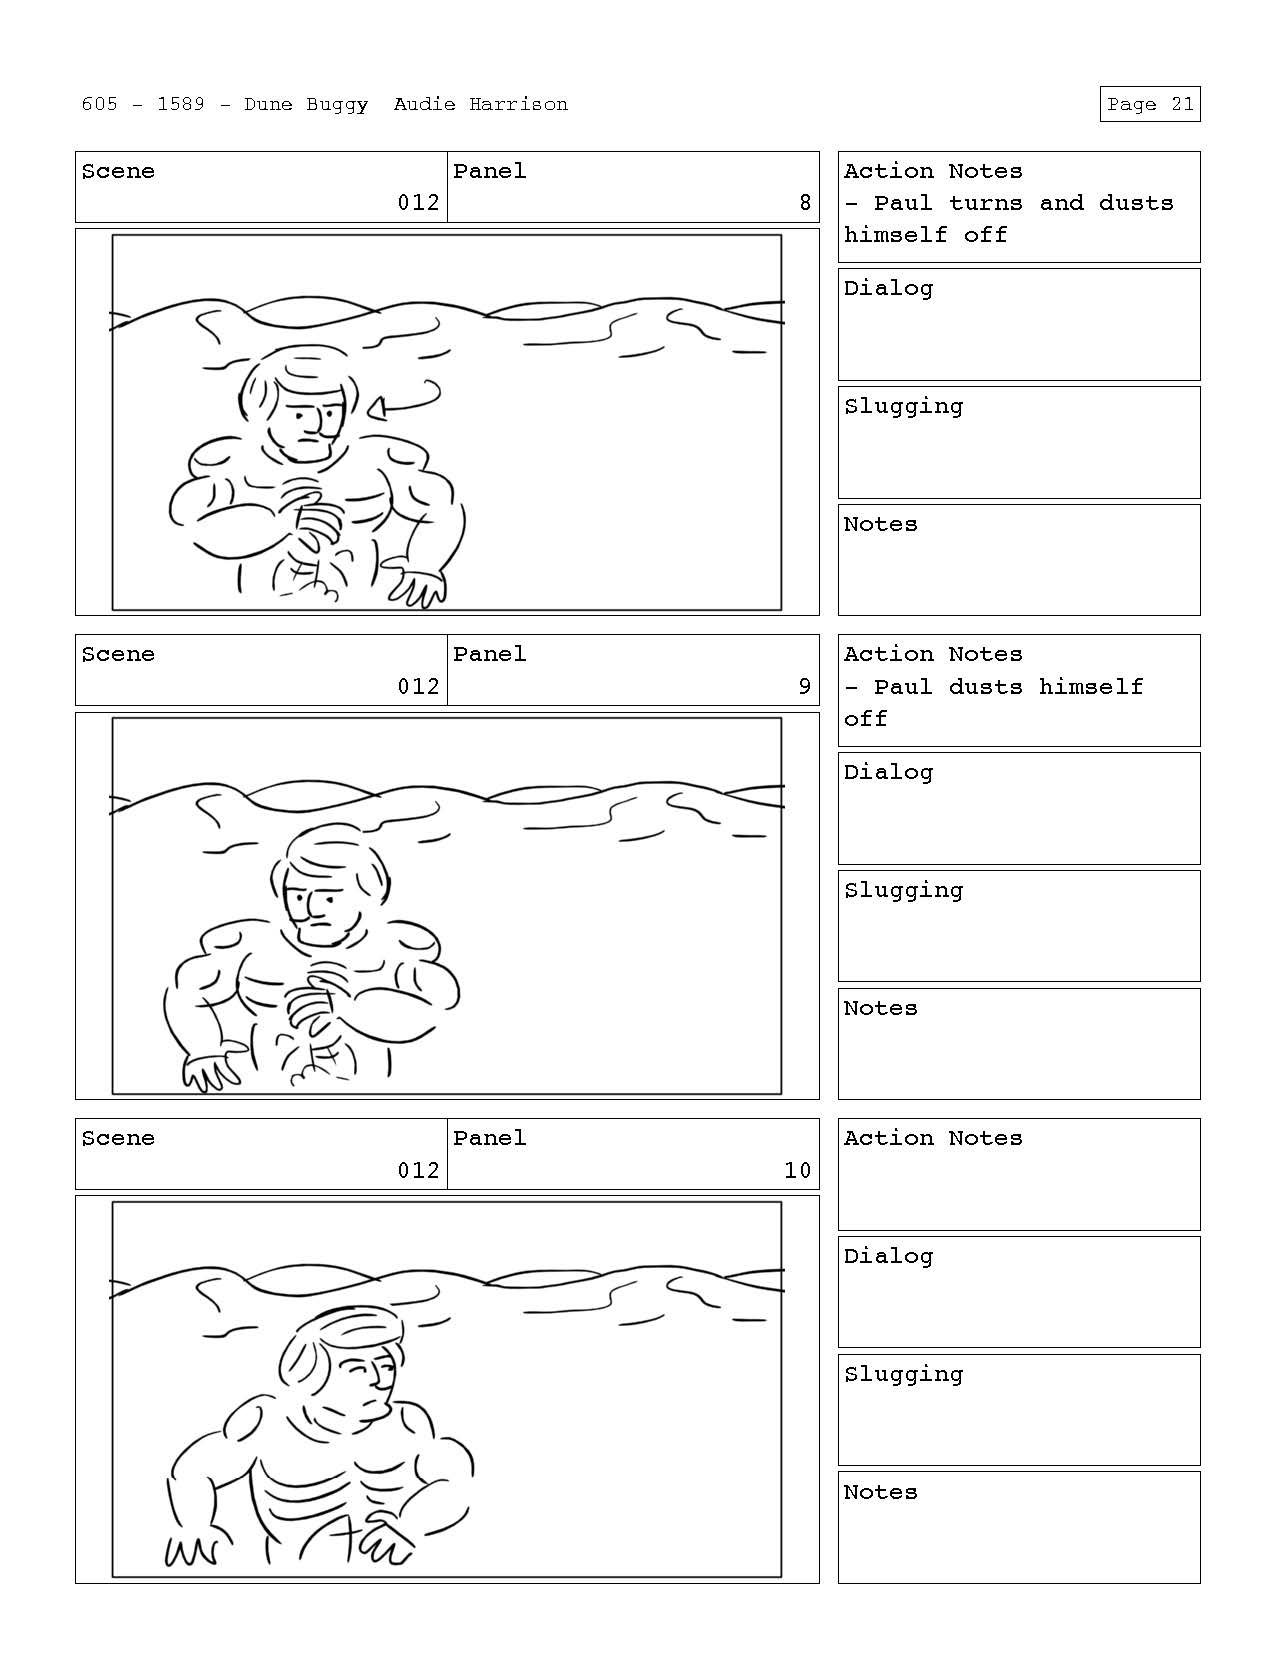 Dune_Buggy_Page_22.jpg